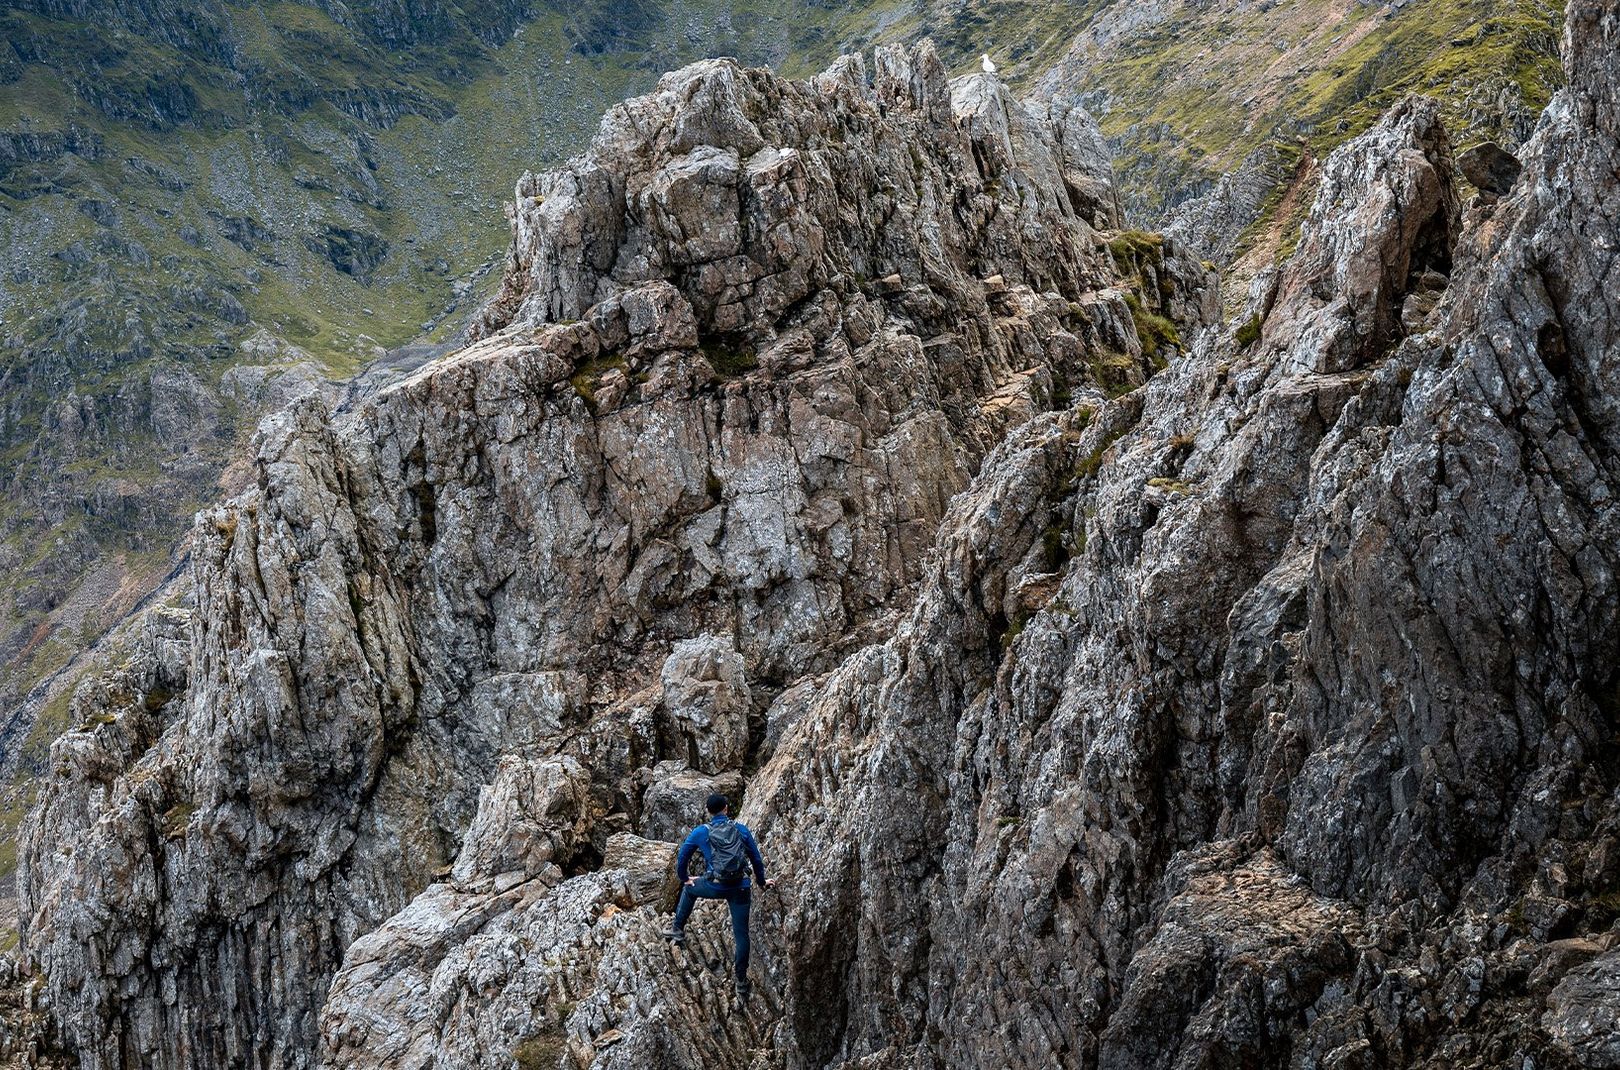 Alex from Scramble this UK taking on Crib Goch in Snowdonia, Wales